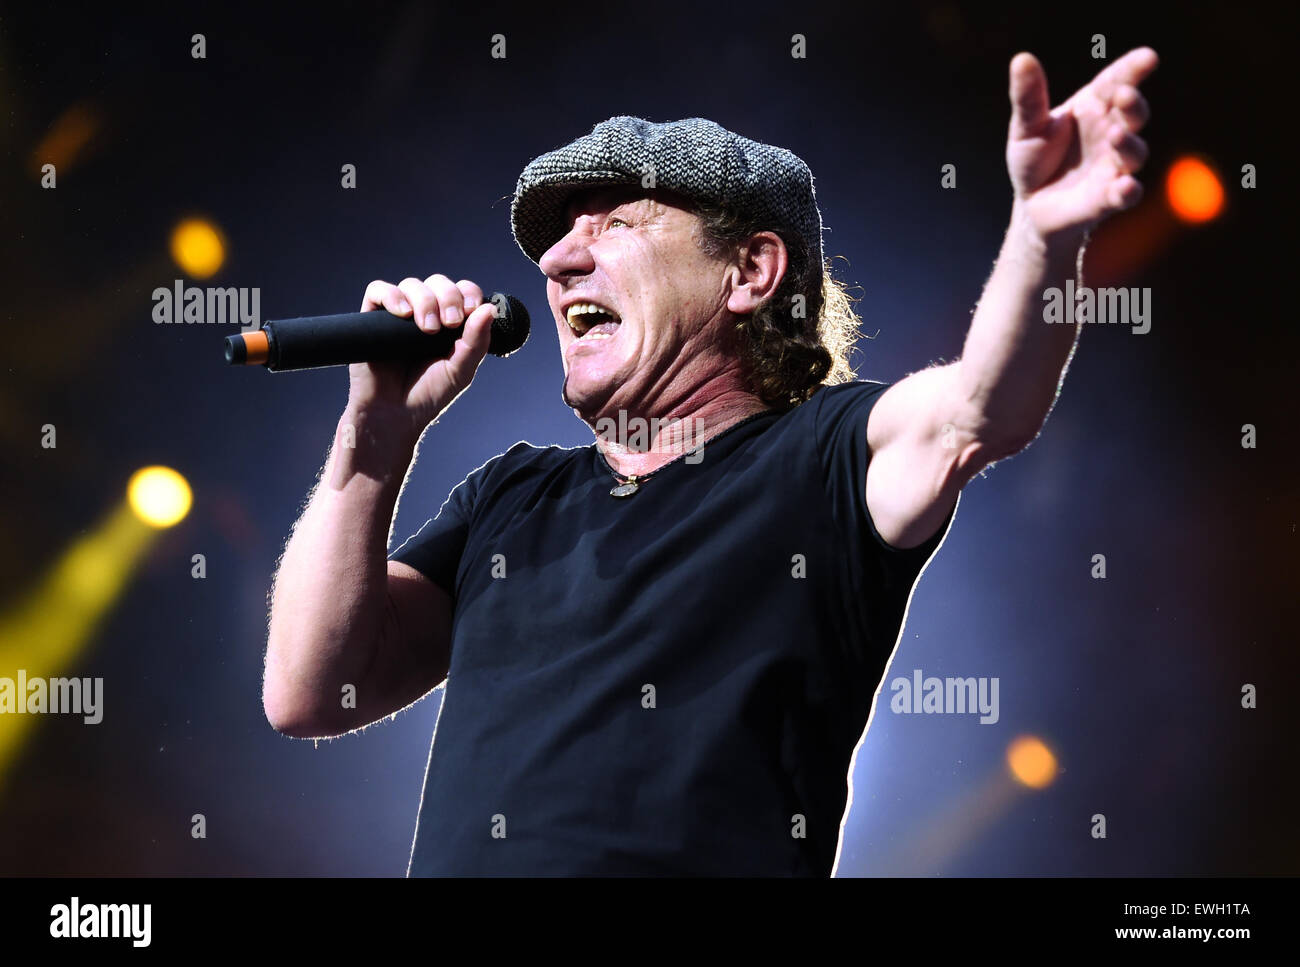 Berlin, Germany. 25th June, 2015. Singer Brian Johnson of Australian rock band AC/DC performs on stage during a concert at the Olympiastadion in Berlin, Germany, 25 June 2015. Photo: Britta Pedersen/dpa/Alamy Live News Stock Photo